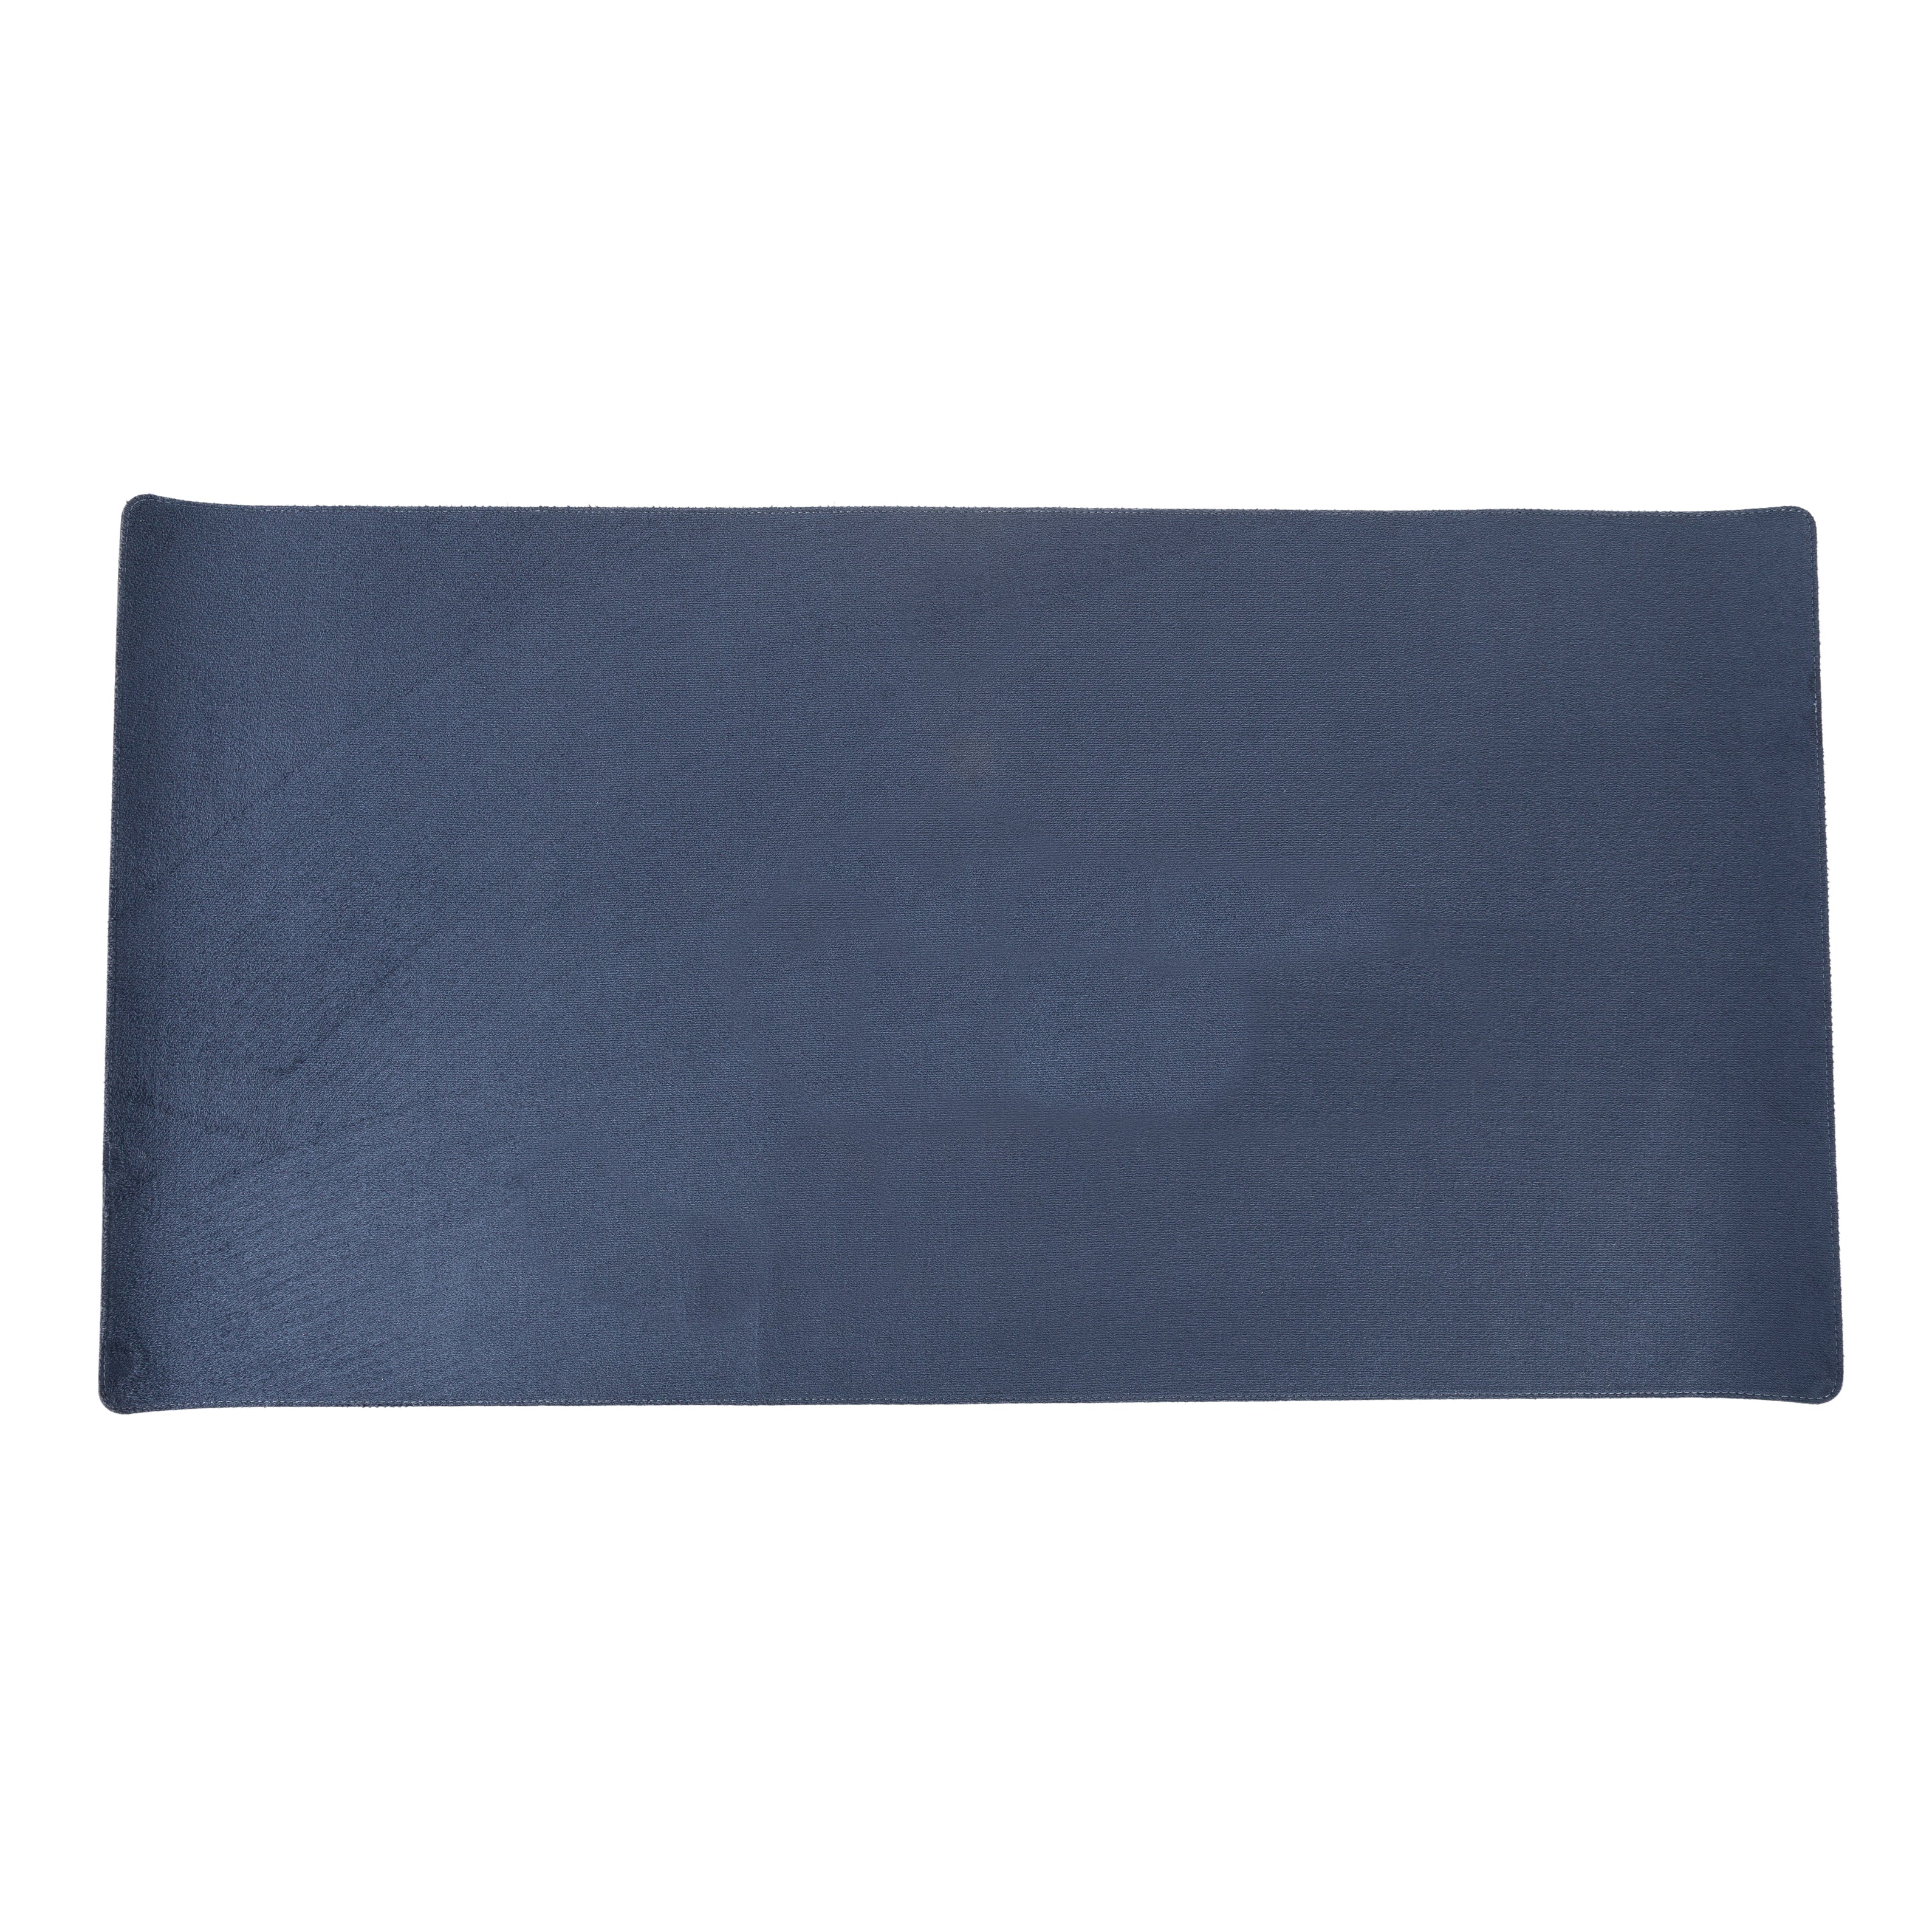 LupinnyLeather Genuine Blue Leather Deskmat, Computer Pad, Office Desk Pad 4